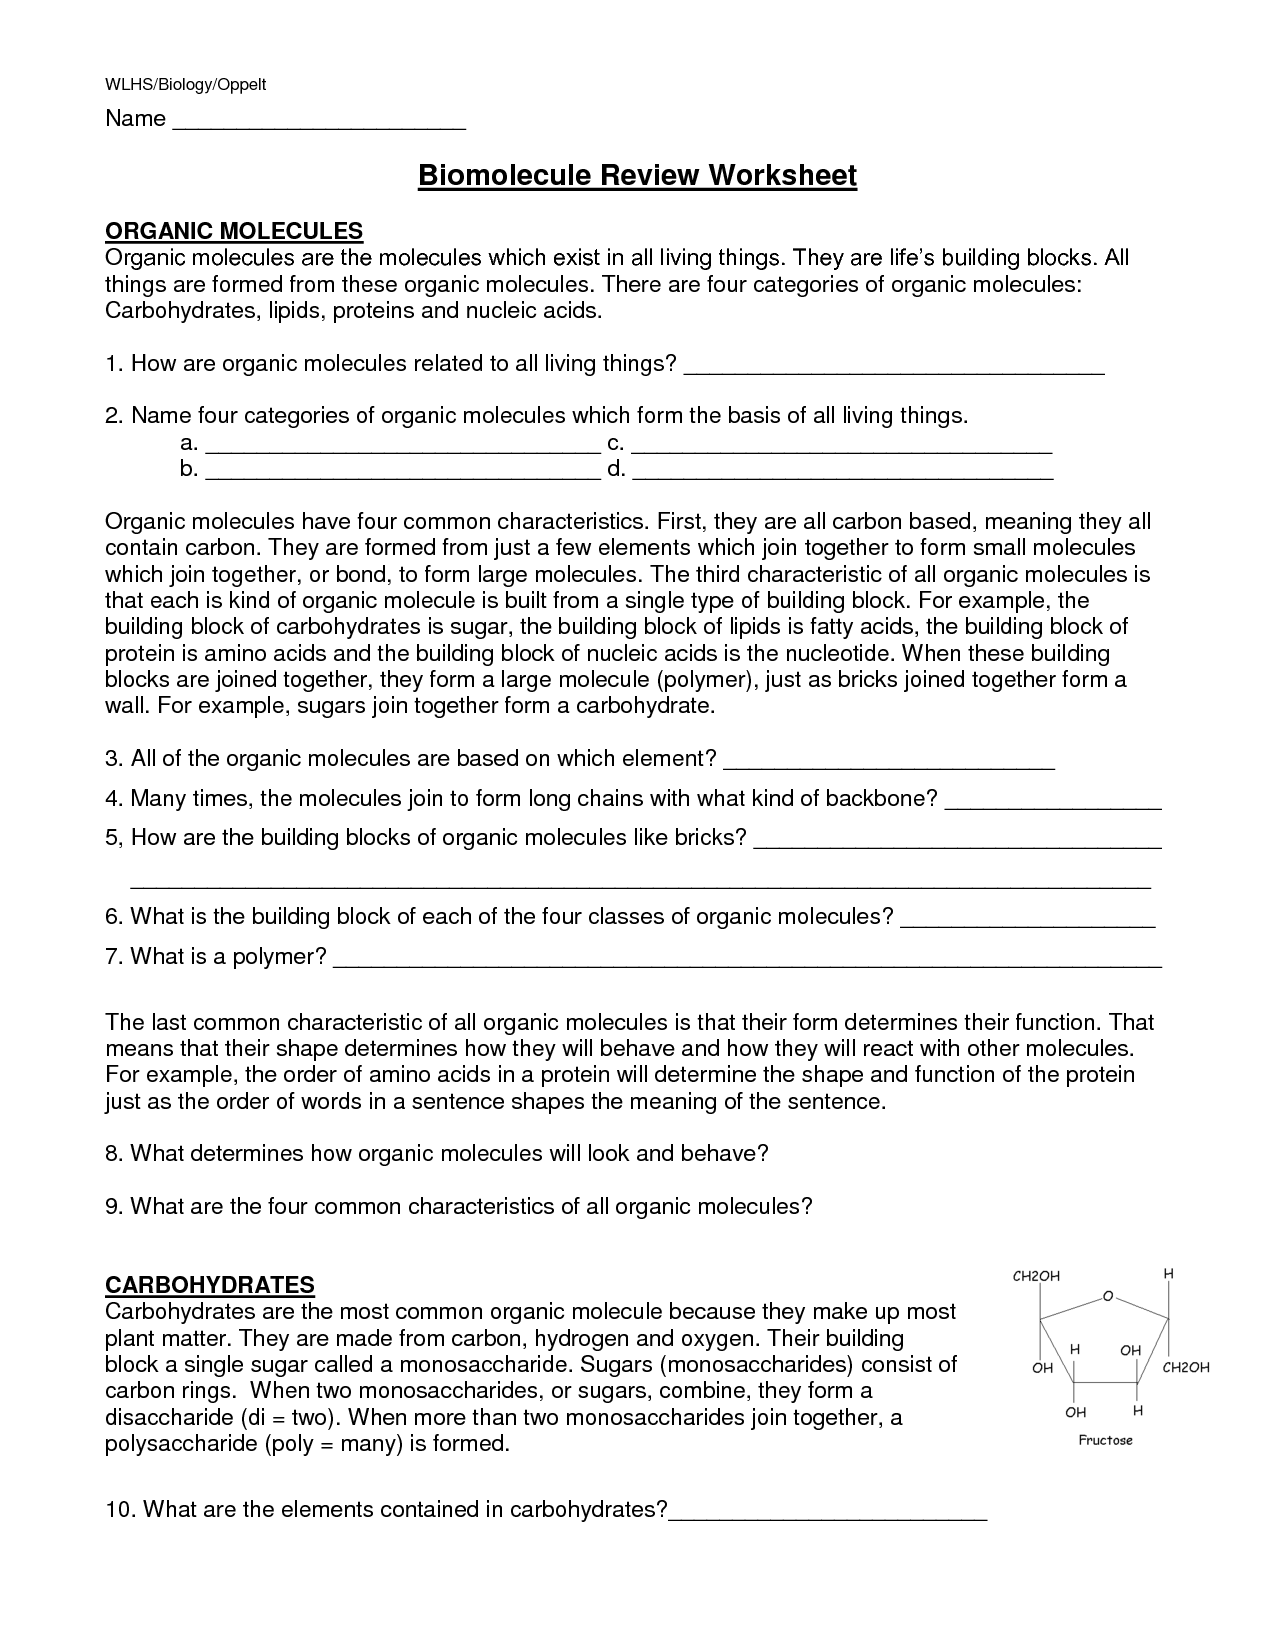 Organic Molecules Worksheet Review Answers Image